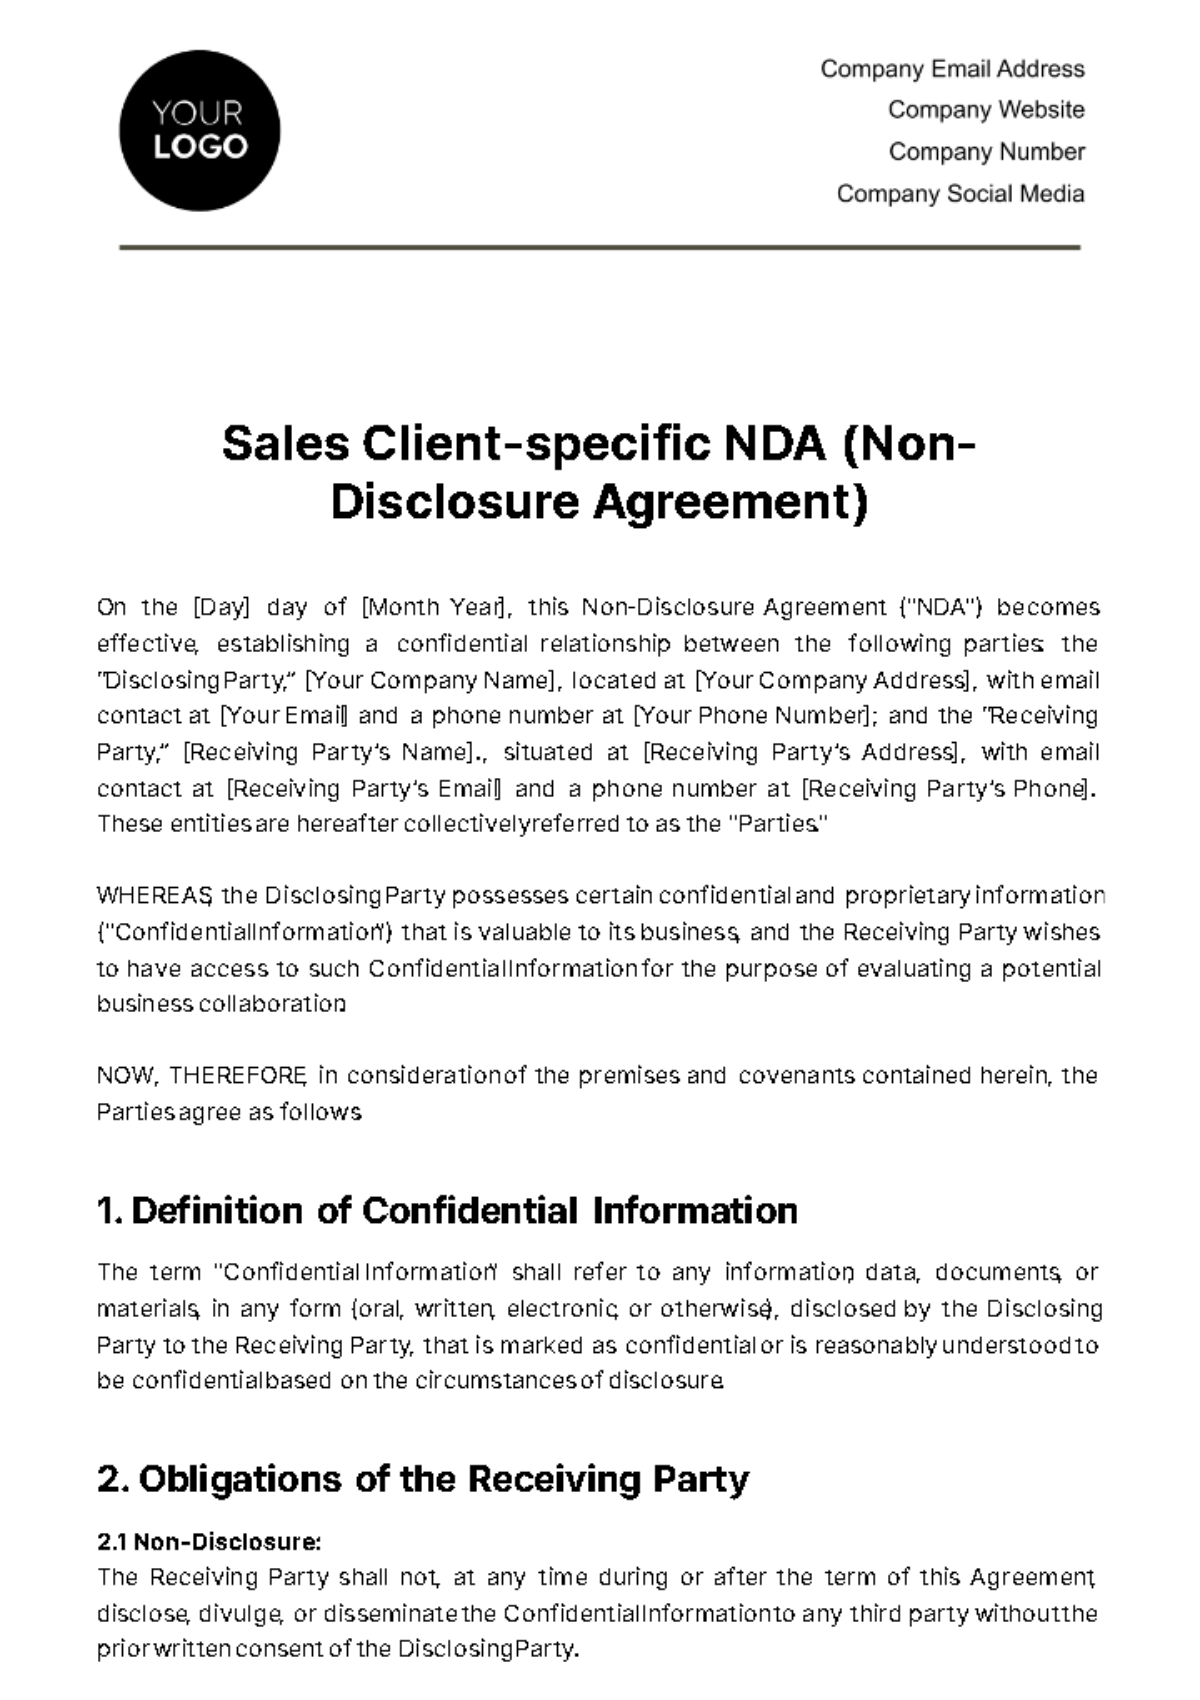 Sales Client-specific NDA (Non-Disclosure Agreement) Template